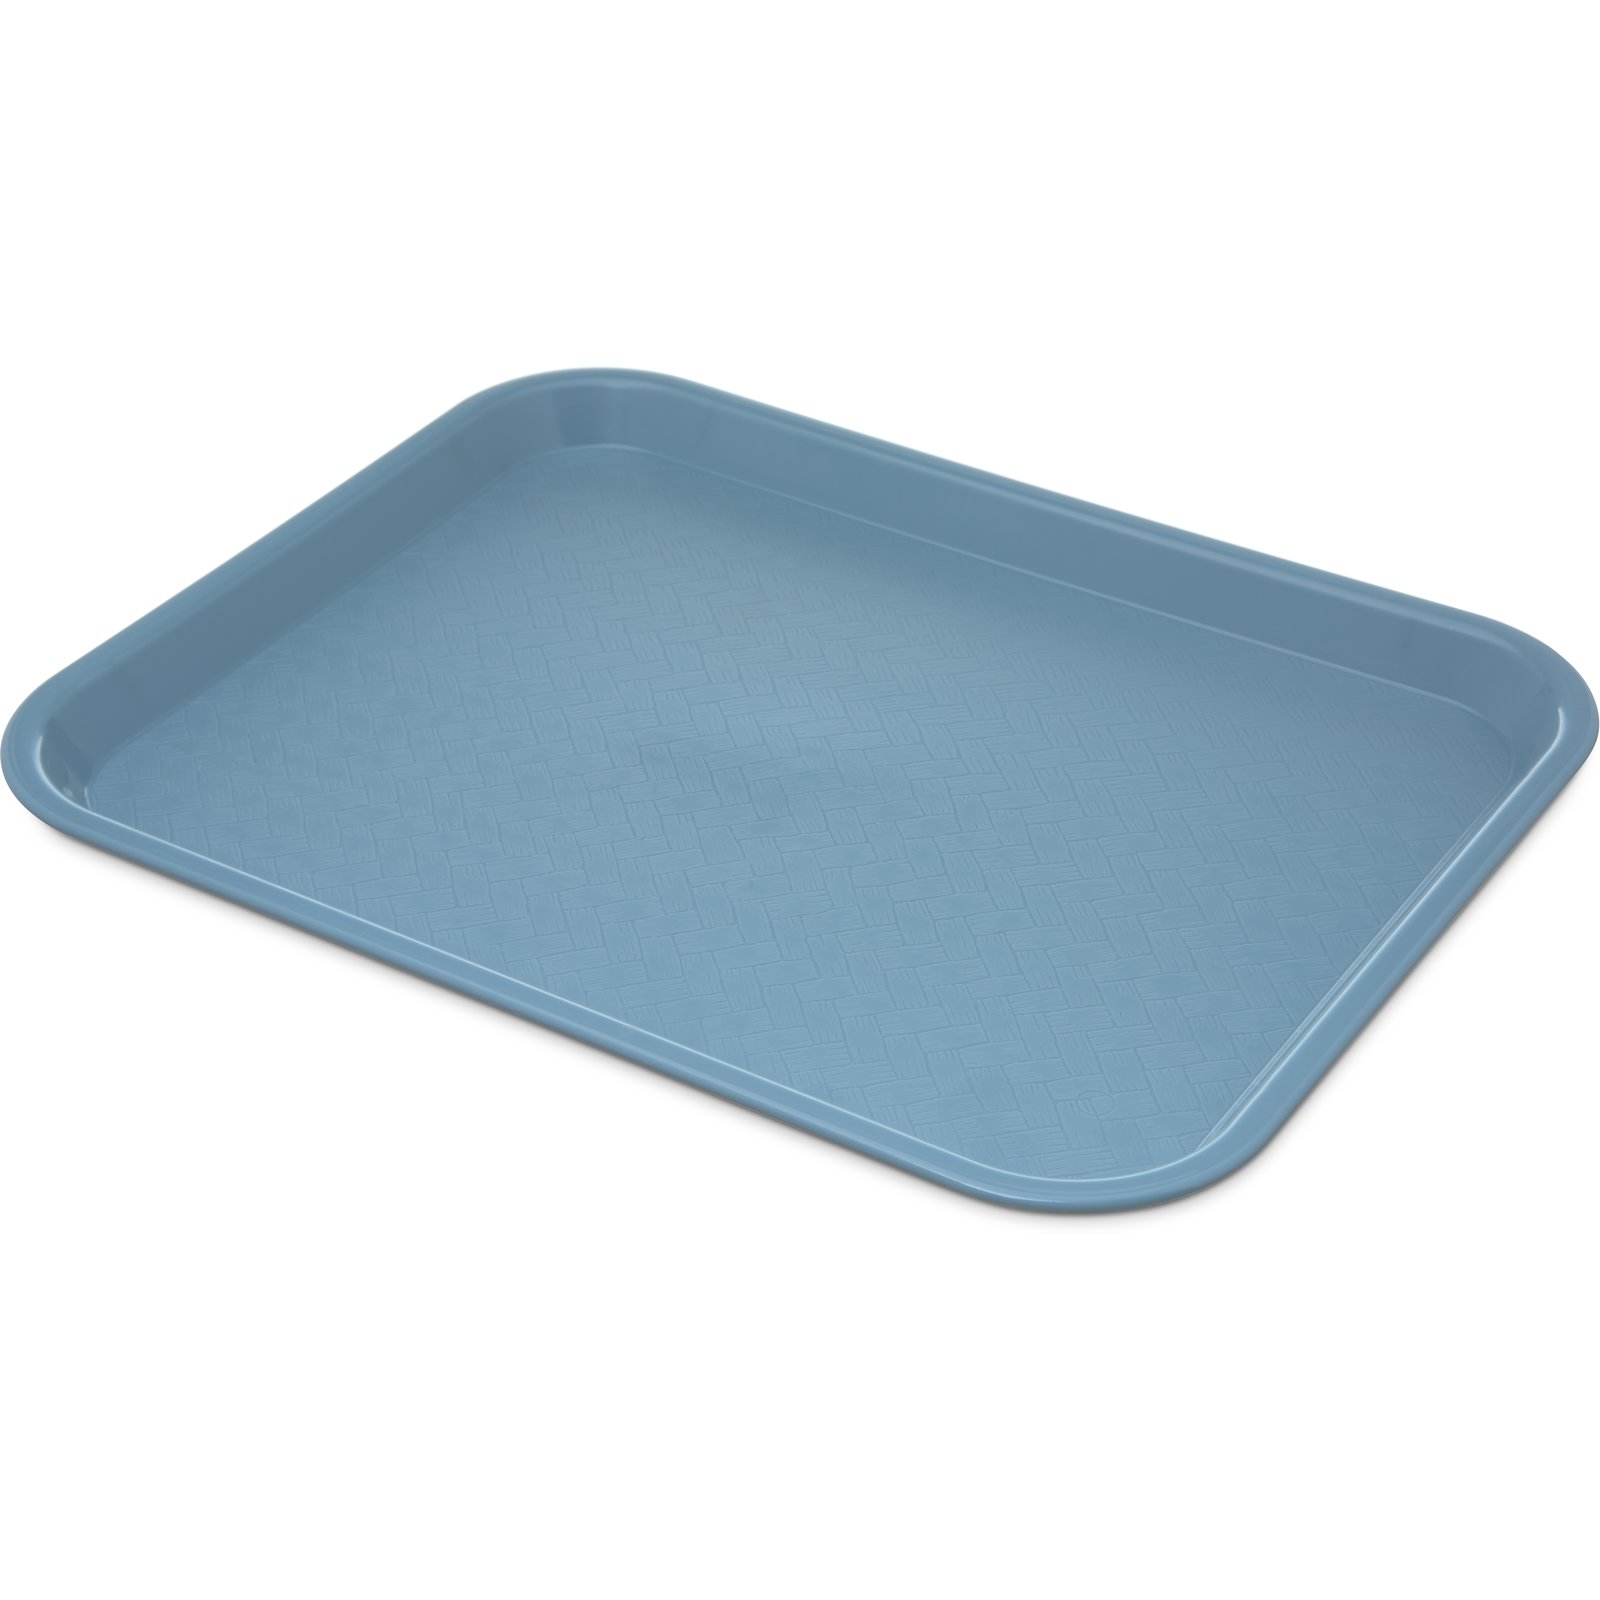 Cambro Penny-Saver Teal Co-Polymer Compartment Cafeteria Tray - 14L x 10W